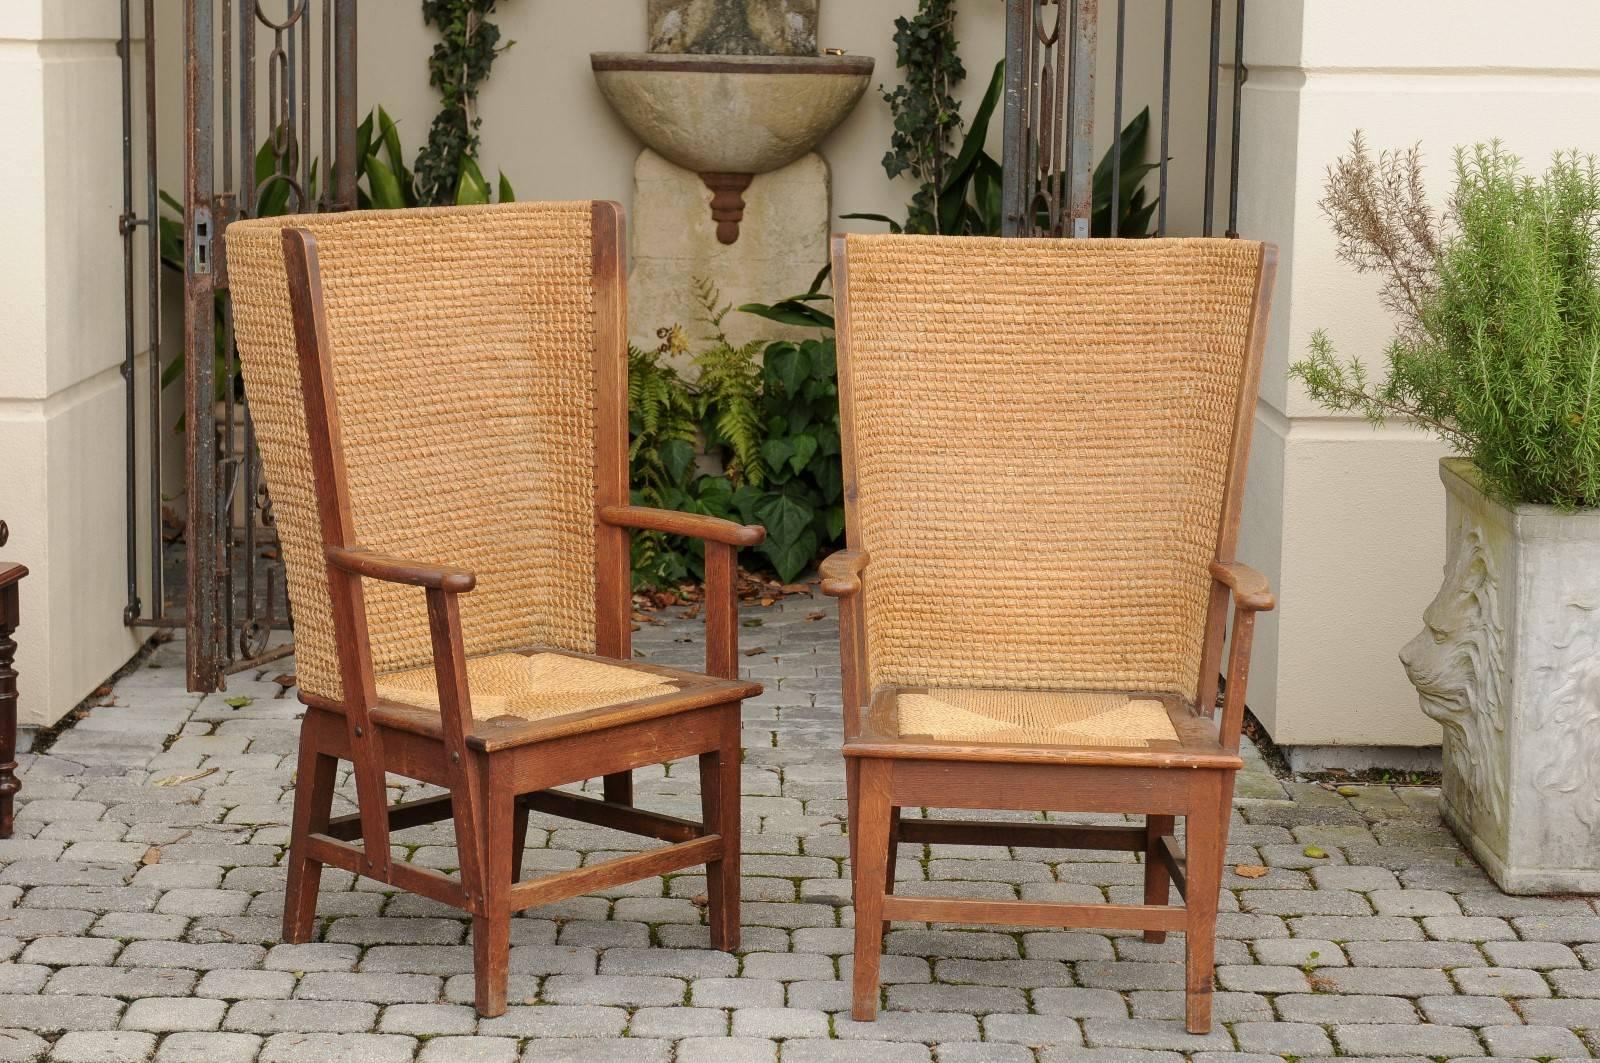 A pair of Scottish Orkney armchairs from the turn of the century. This pair of oak and straw armchairs, circa 1900 was born in the Orkney Islands near the northern tip of Scotland. Produced in the late 19th, early 20th century, these stylistically